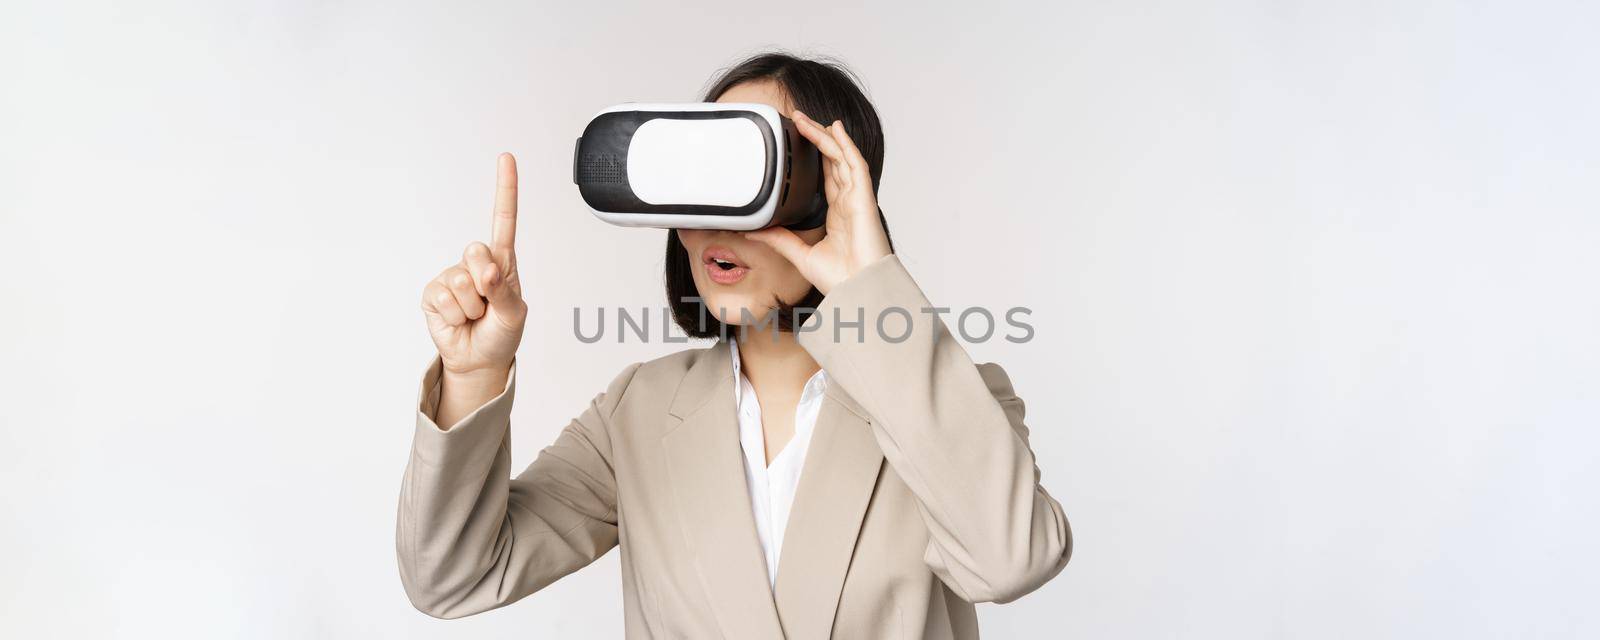 Amazed business woman in suit using virtual reality glasses, looking amazed in vr headset, standing over white background.